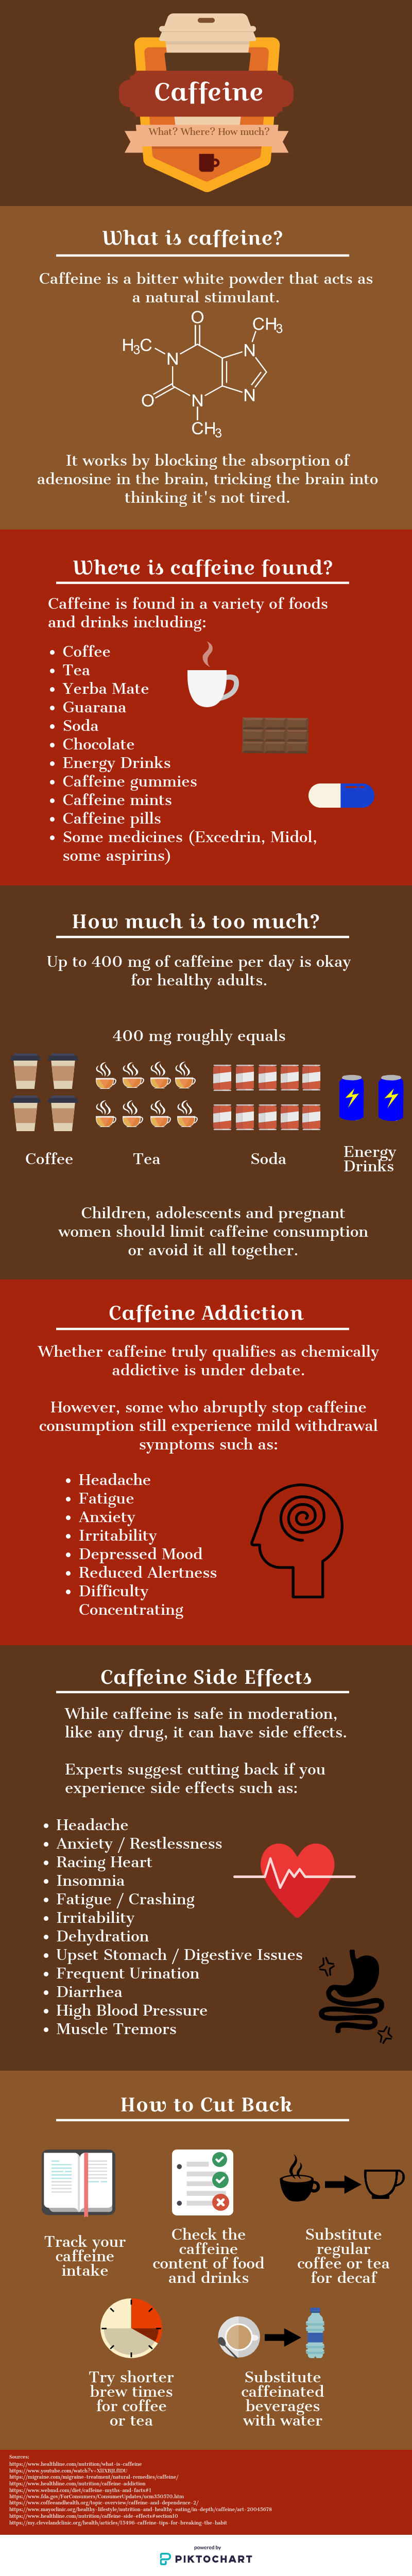 INFOGRAPHIC: Graphic describes what caffeine is, where it is found, how much is acceptable, its side effects, and how to cut back